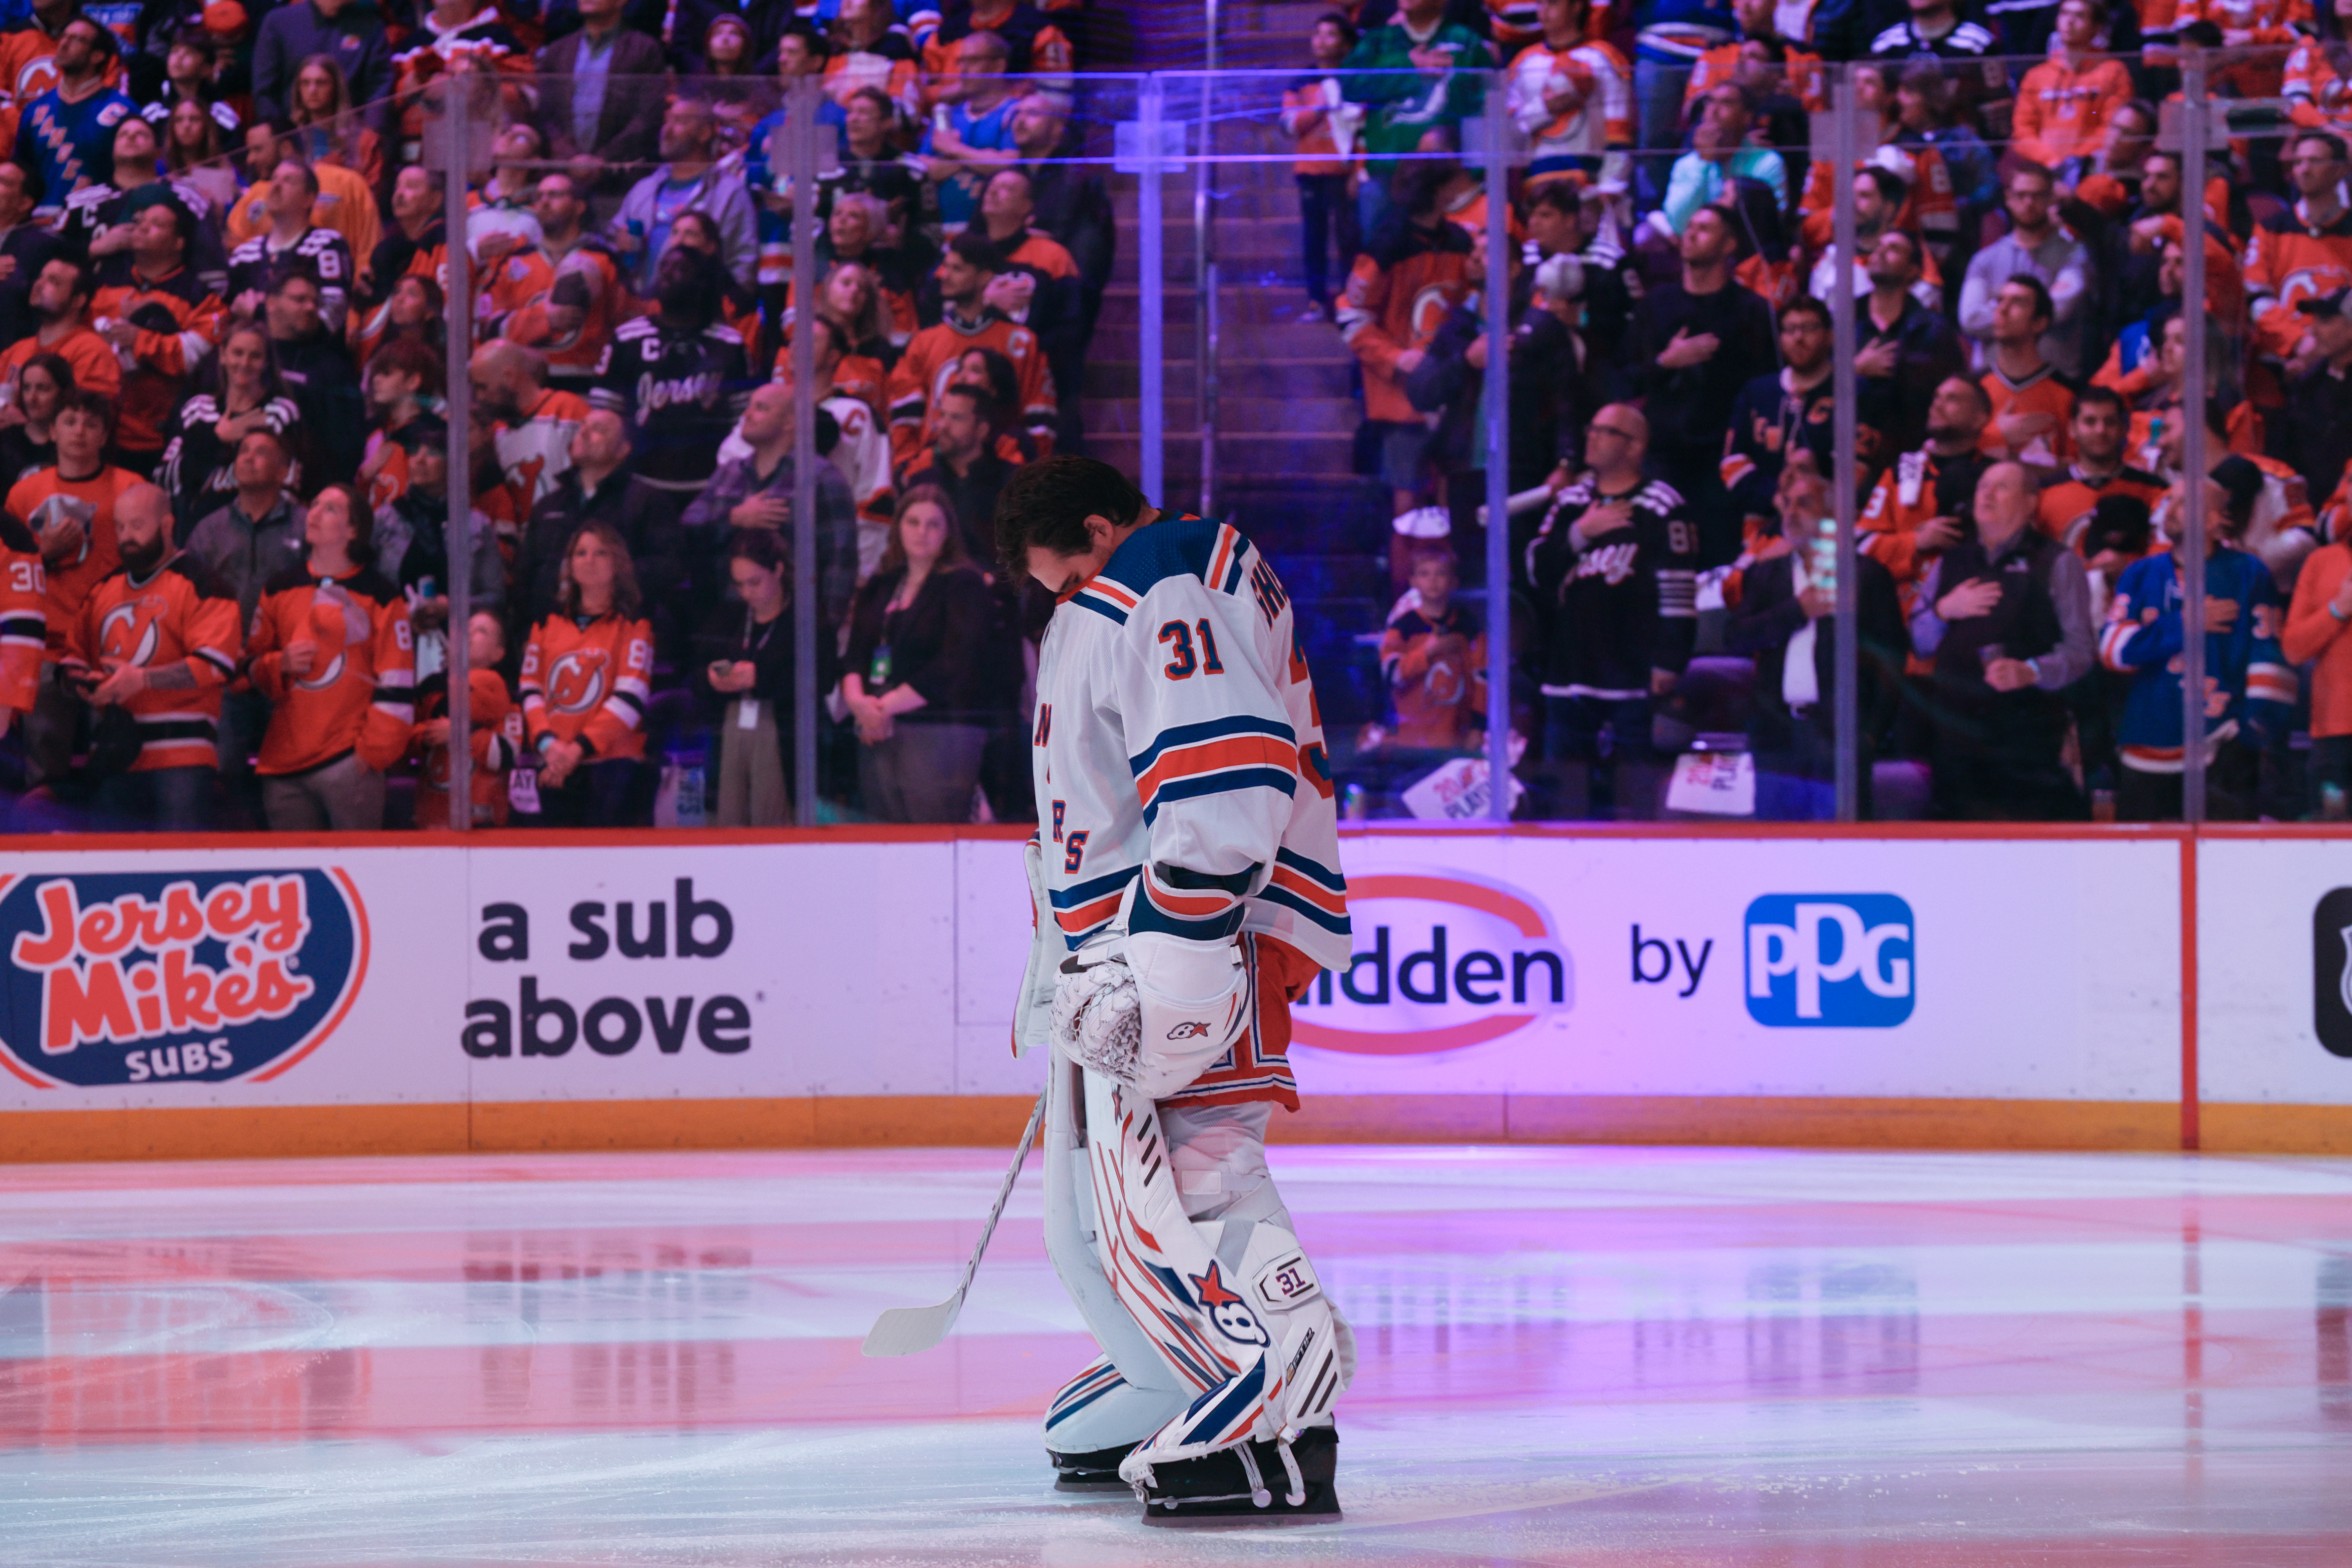 New York Rangers goaltender Igor Shesterkin (31) during the national anthem before the Rangers played the New Jersey Devils in Game 1 of the NHL Stanley Cup playoffs on Tuesday, April 18, 2023 in Newark, N.J. The Rangers won, 5-1.